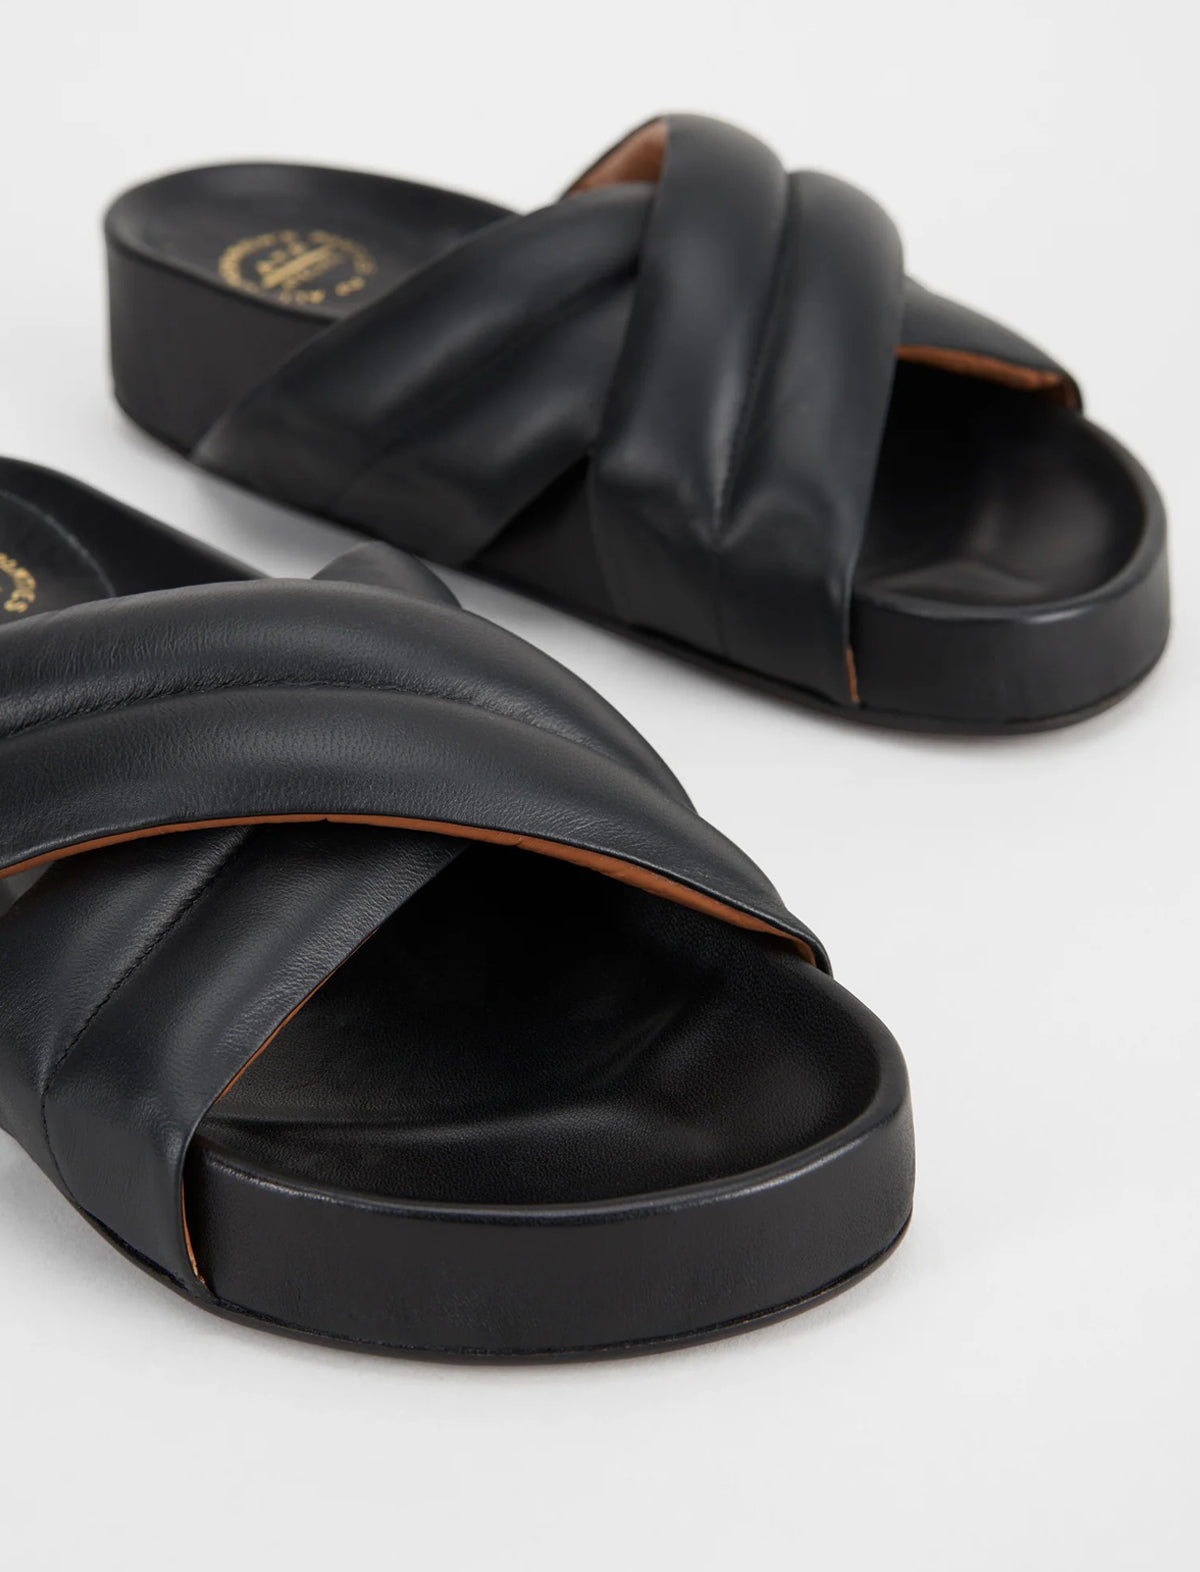 ATP Atelier Airali Nappa Everyday Sandals in Black